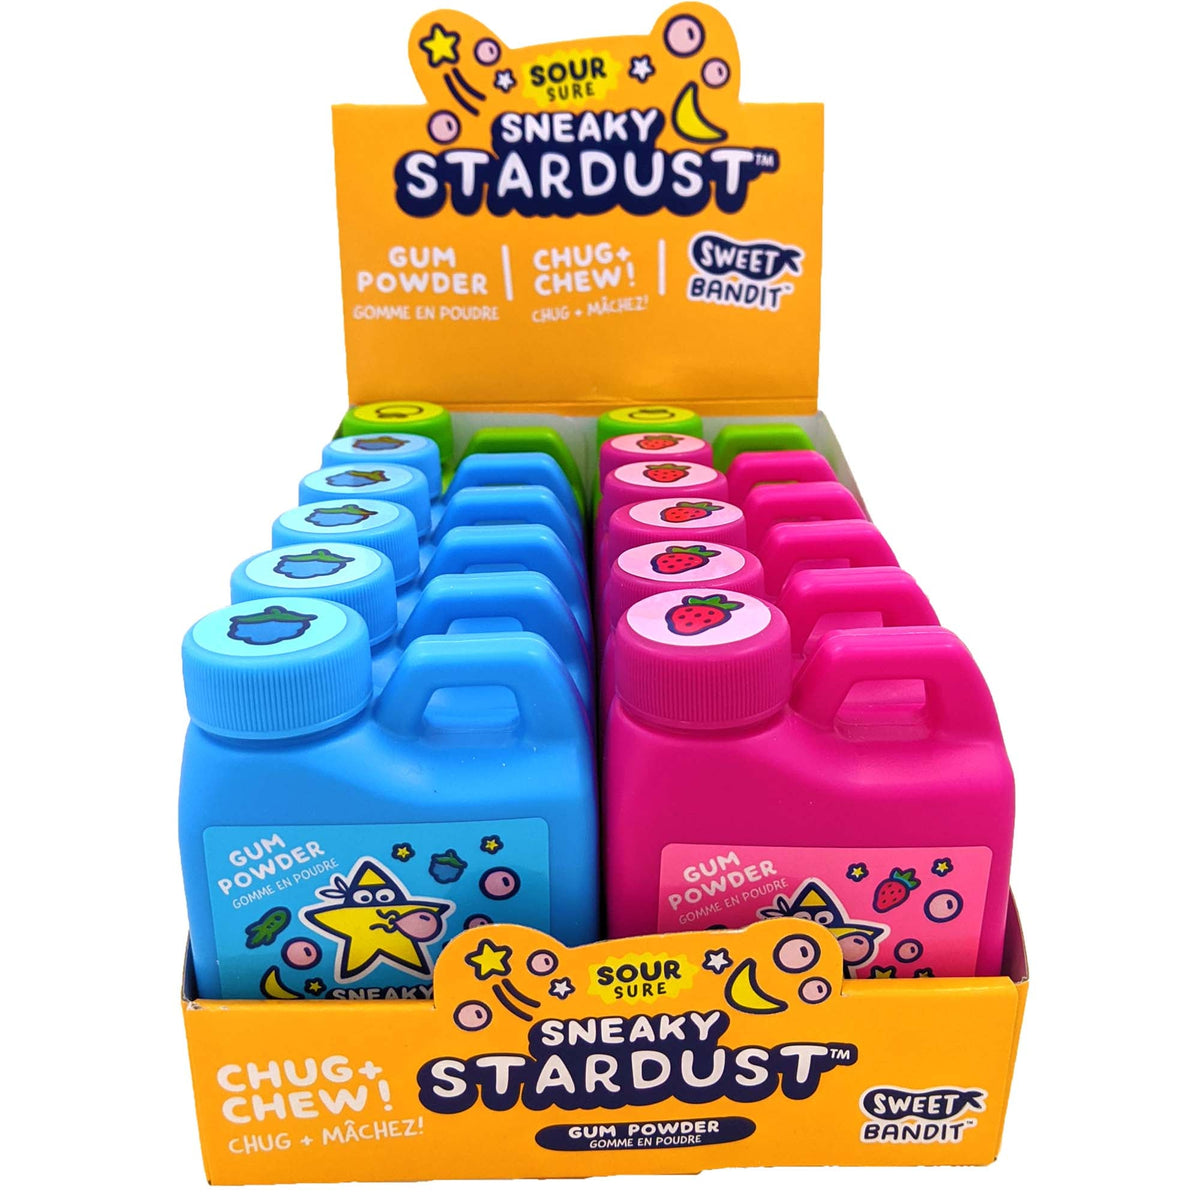 REGAL CONFECTION INC. Candy Sweet Bandit Sneaky Stardust Gum 55g ,1 count